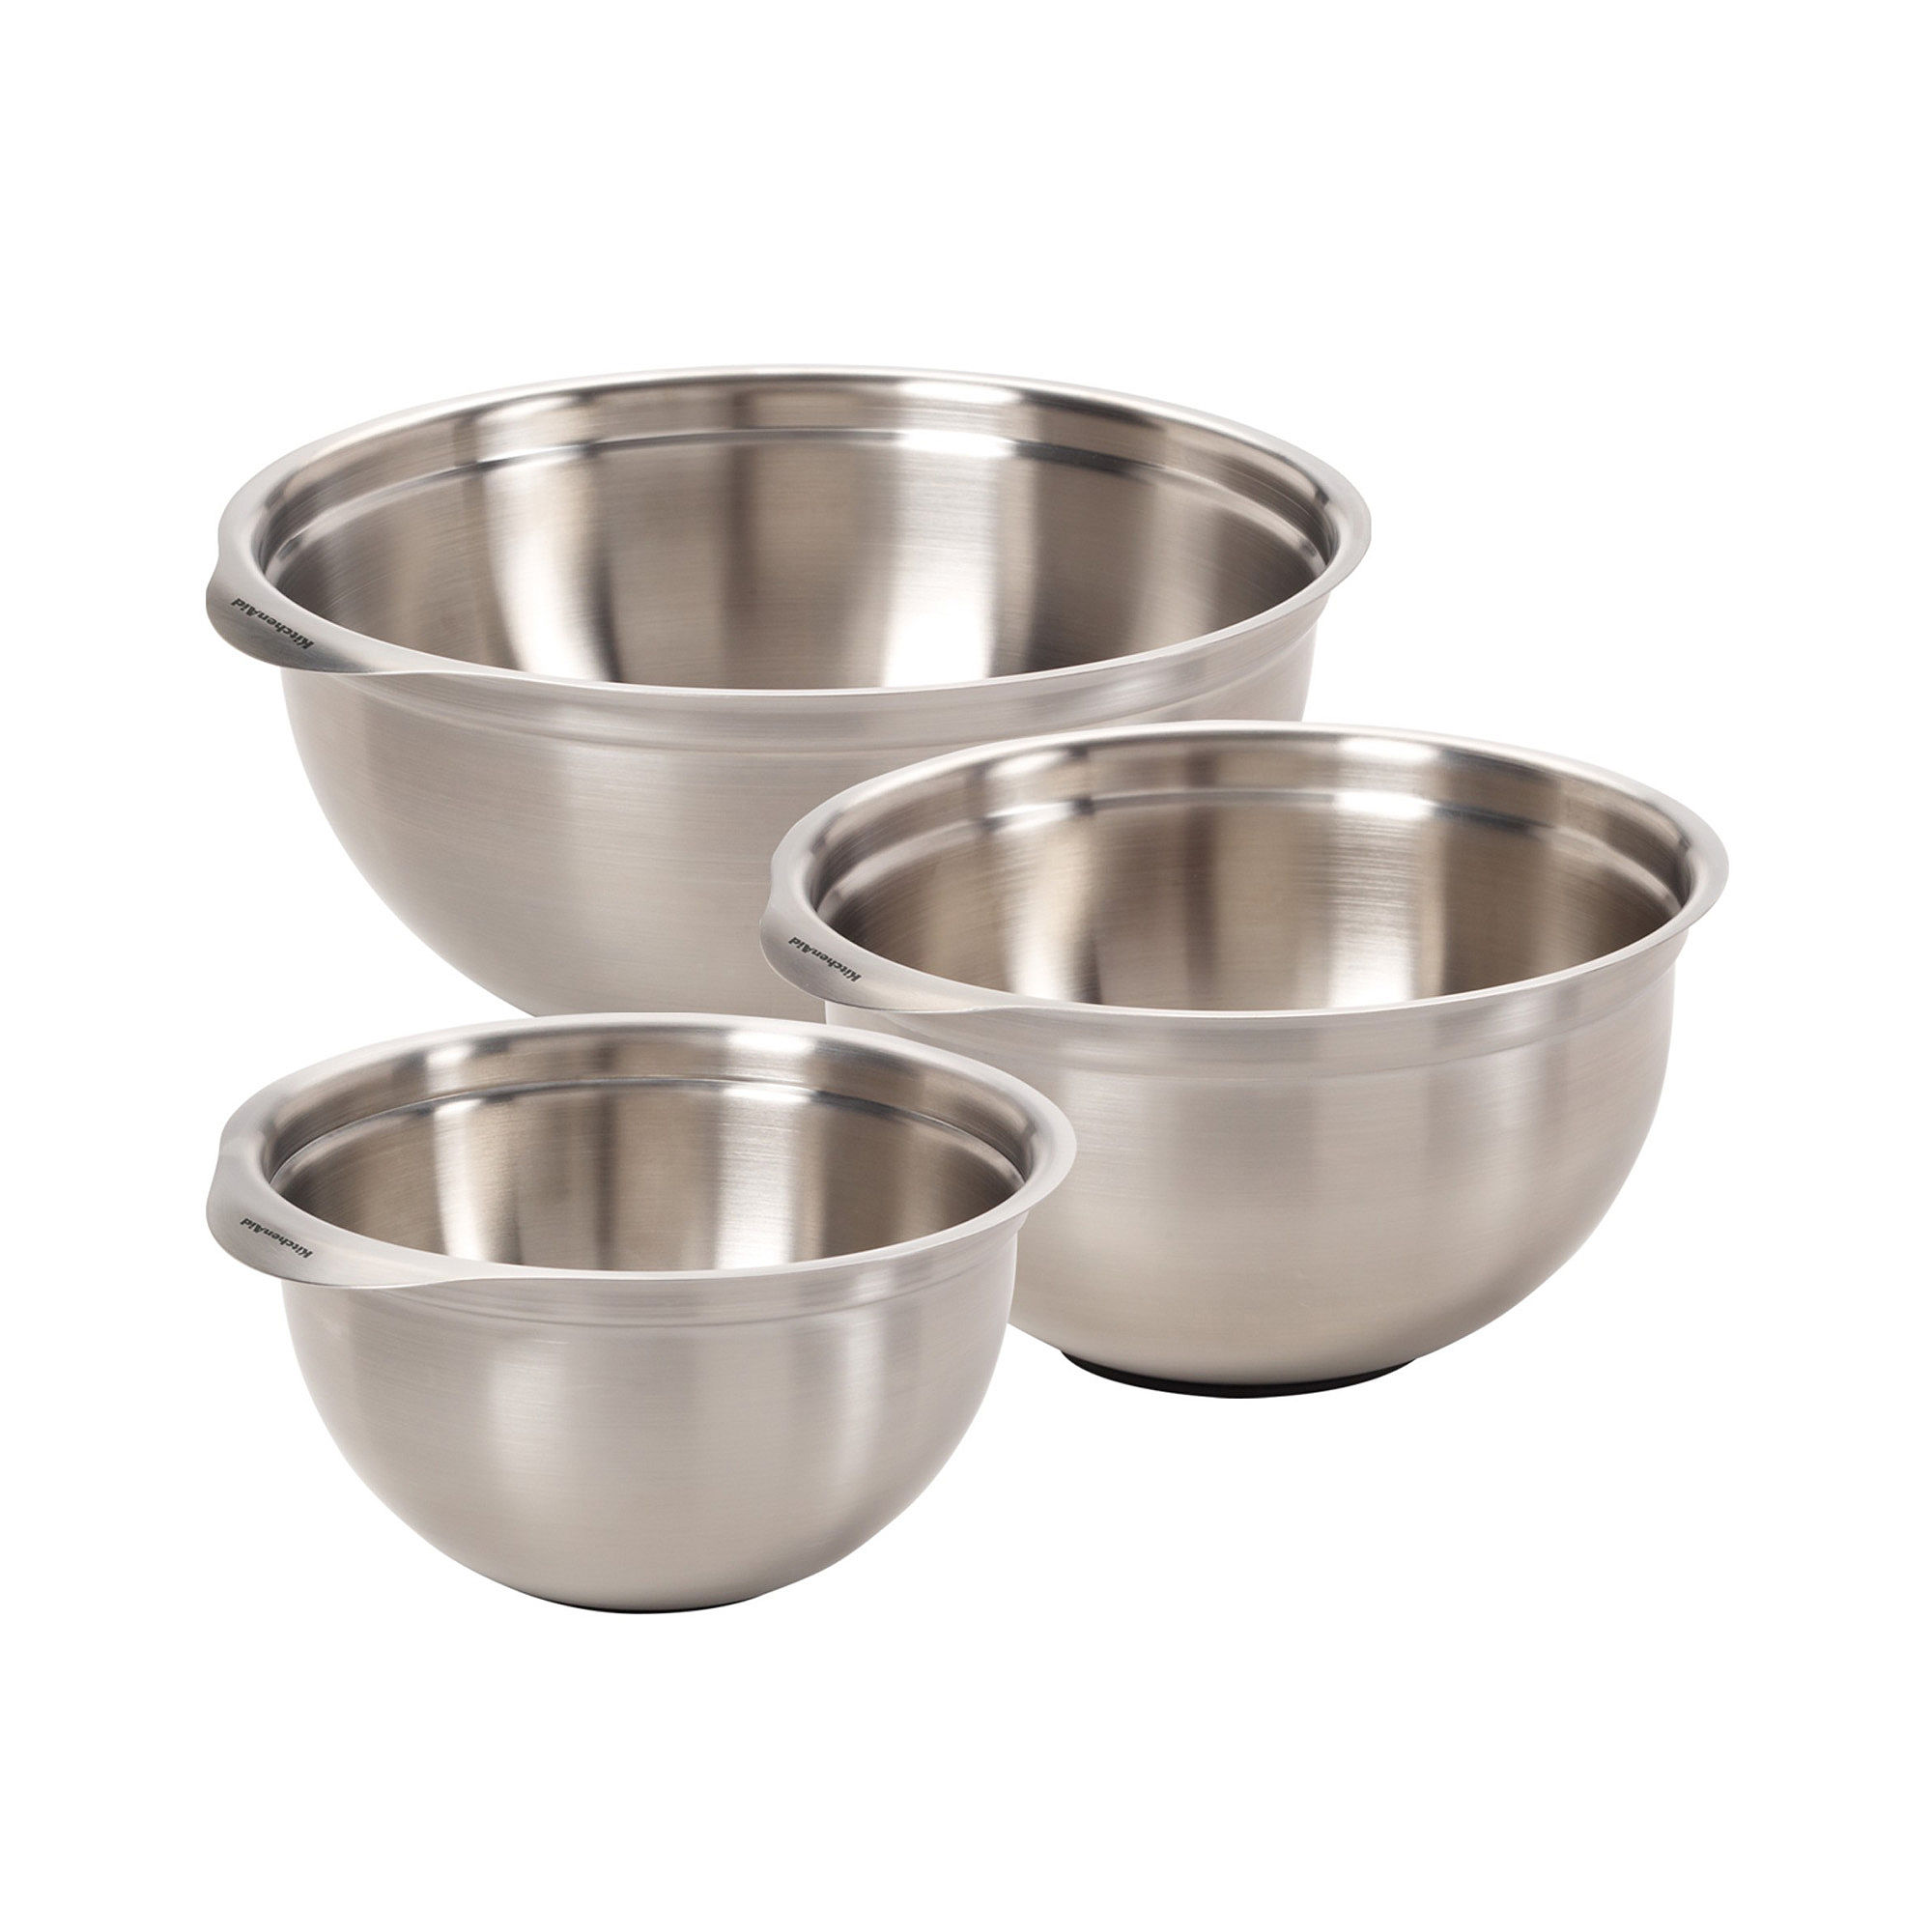 UPC 024131188062 product image for KitchenAid Gourmet 3-pc. Stainless Steel Mixing Bowls | upcitemdb.com